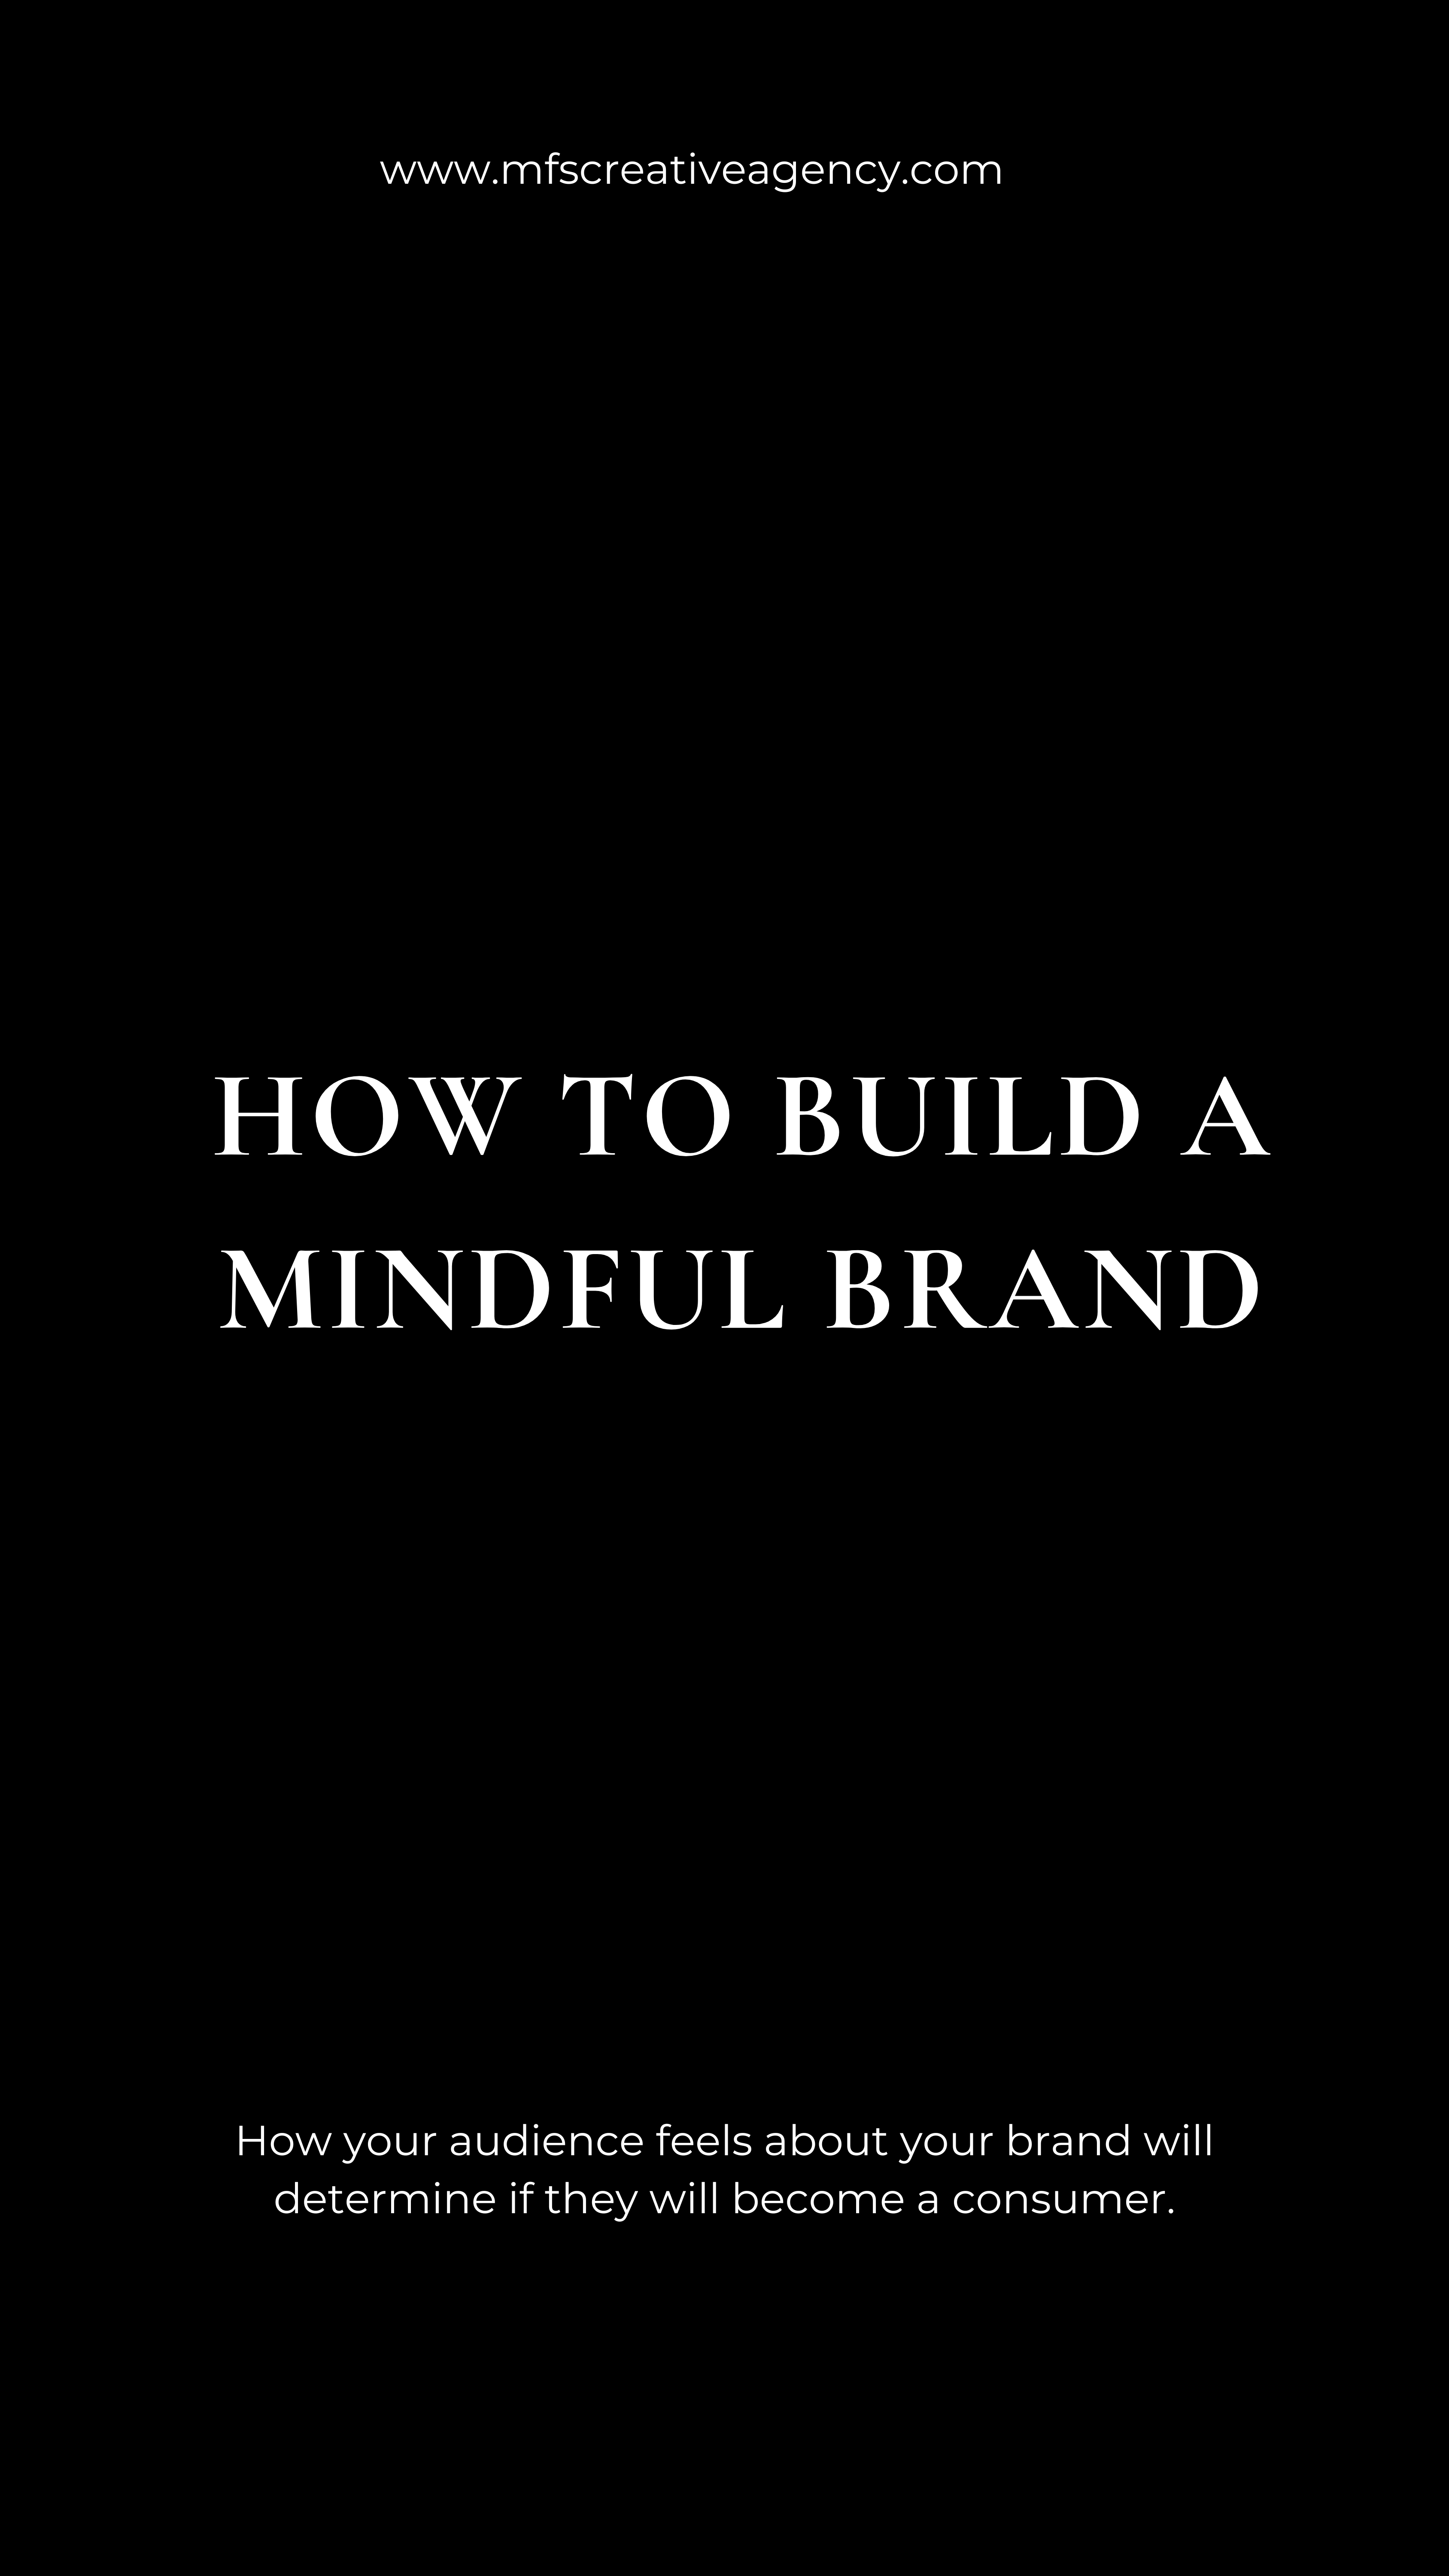 Tips to help you build a mindful brand so customers will buy your product or service.